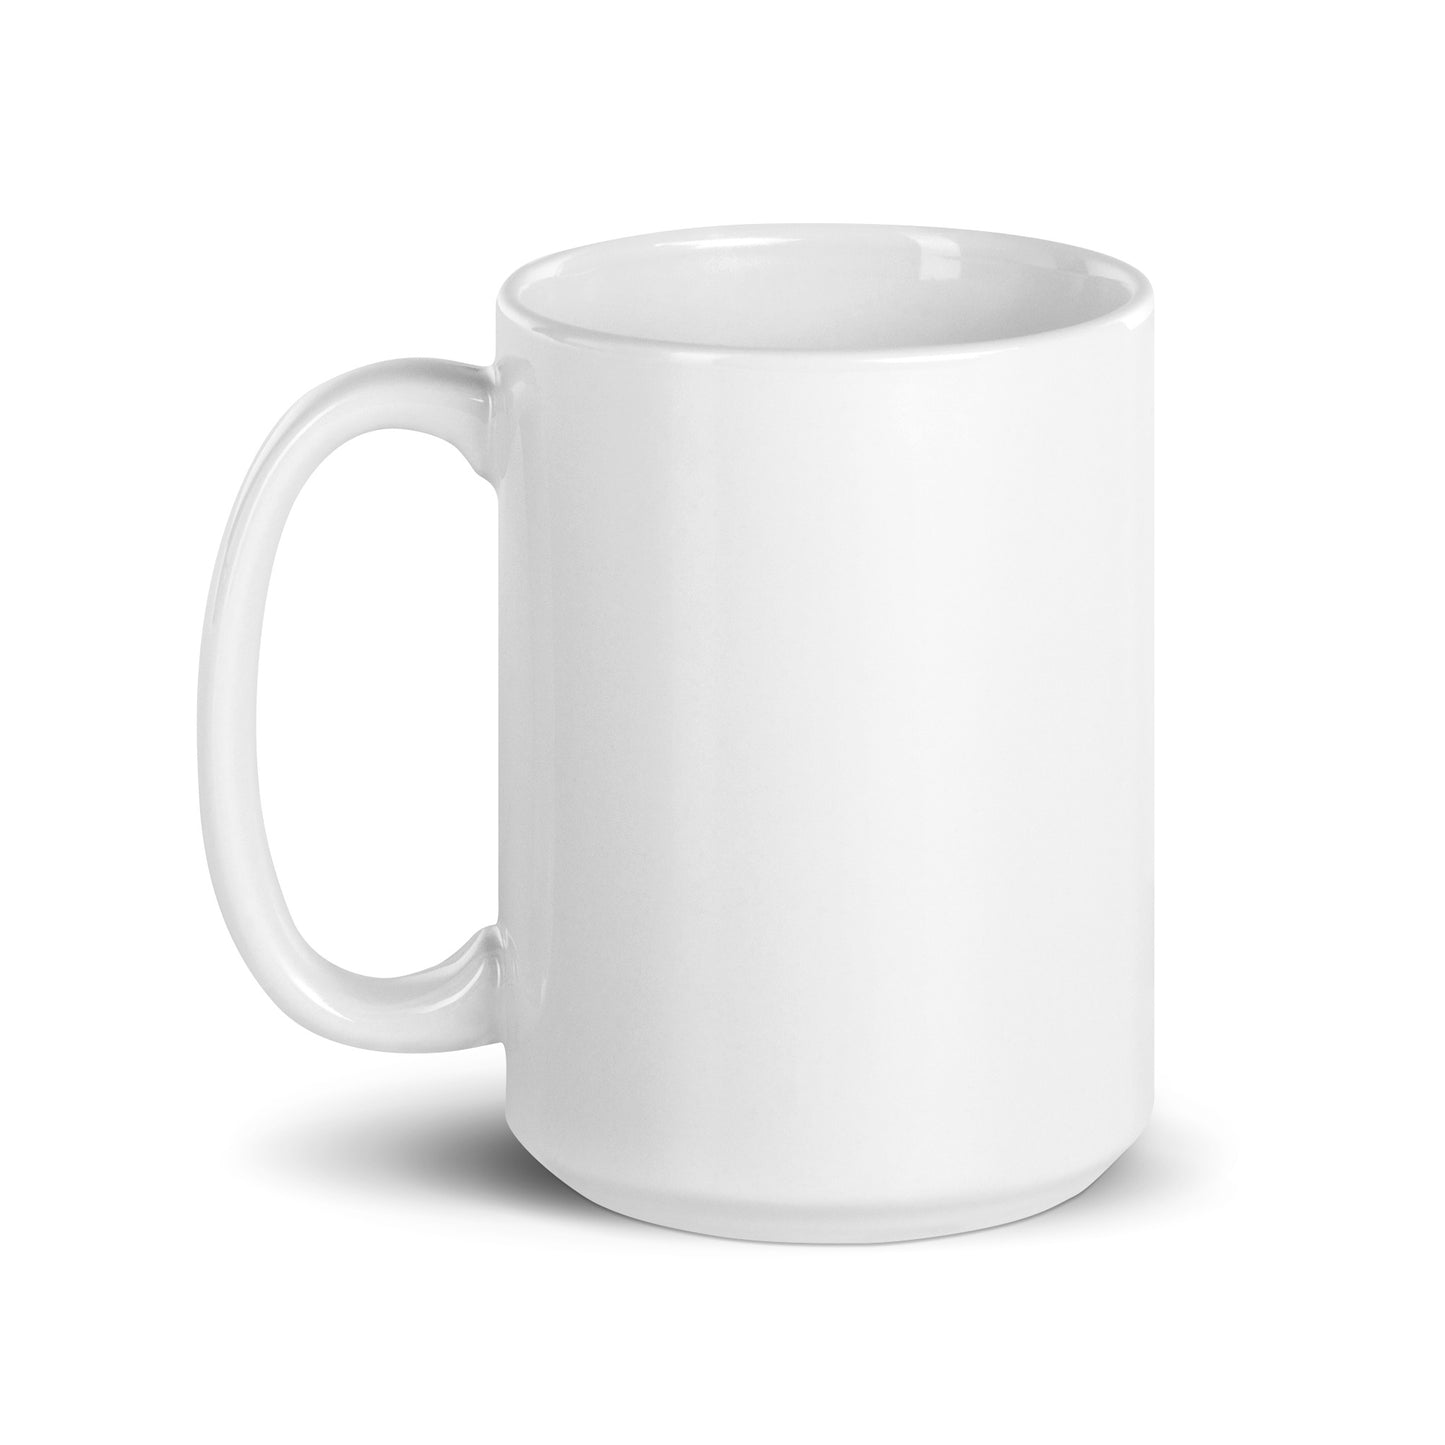 "Out of Bed Coffee" White Glossy Mug